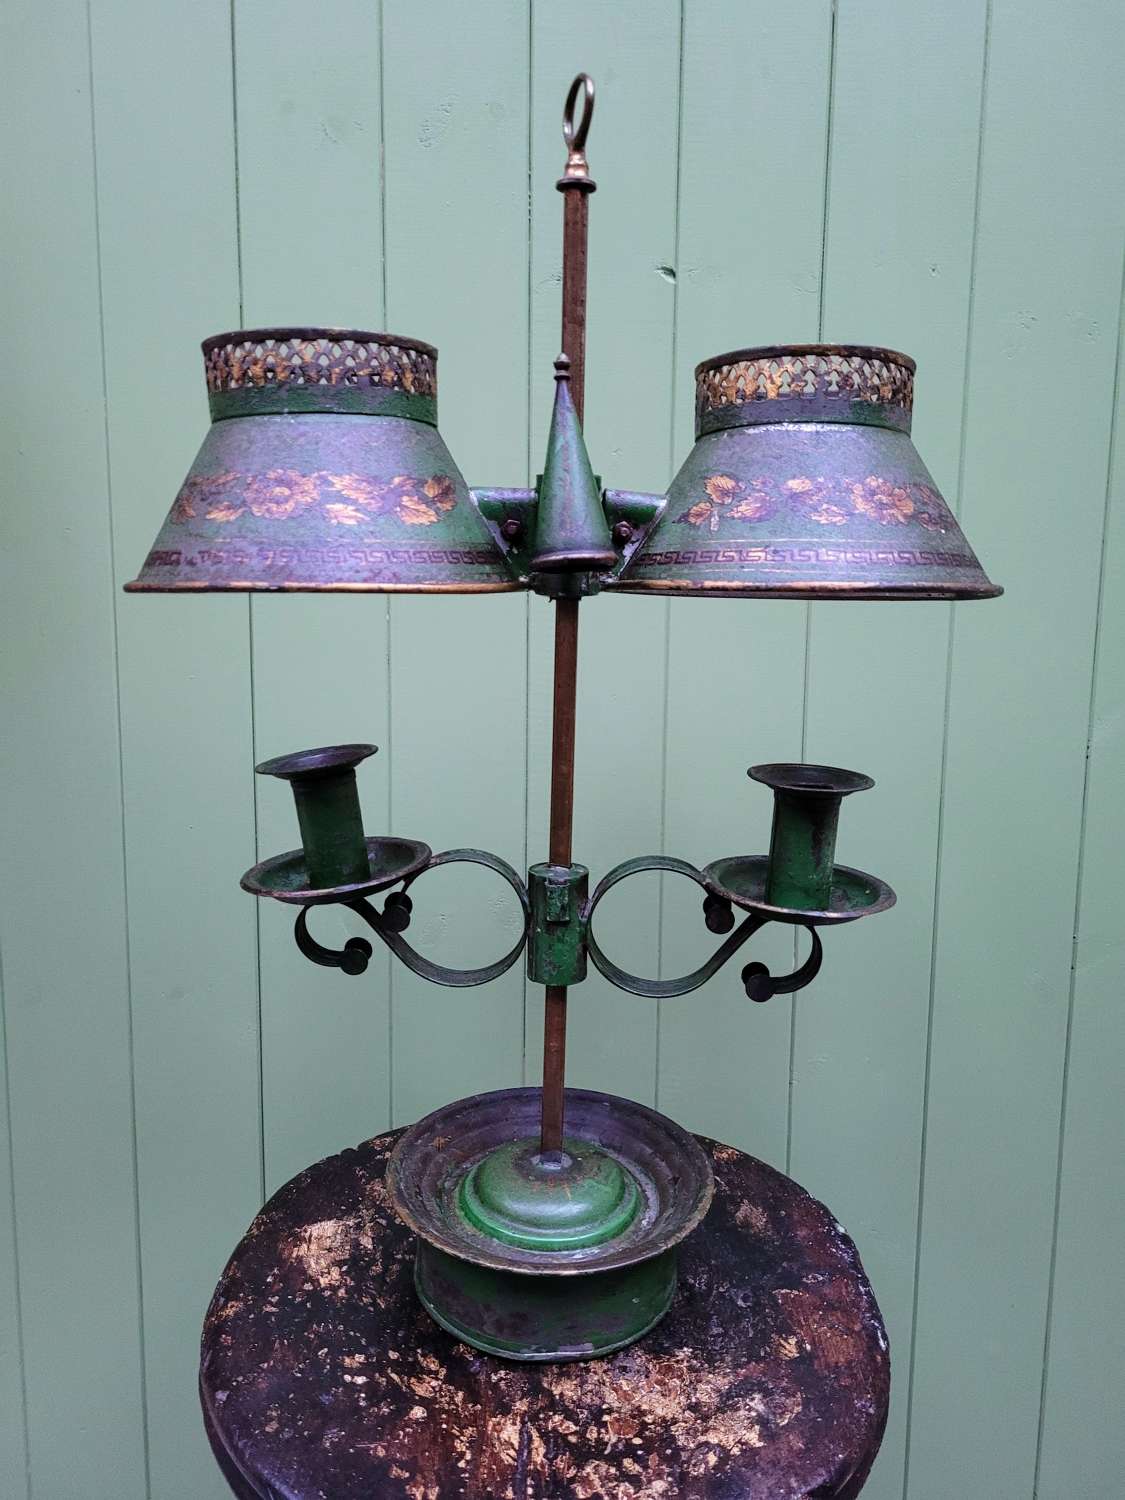 19th century French Bouillotte lamp